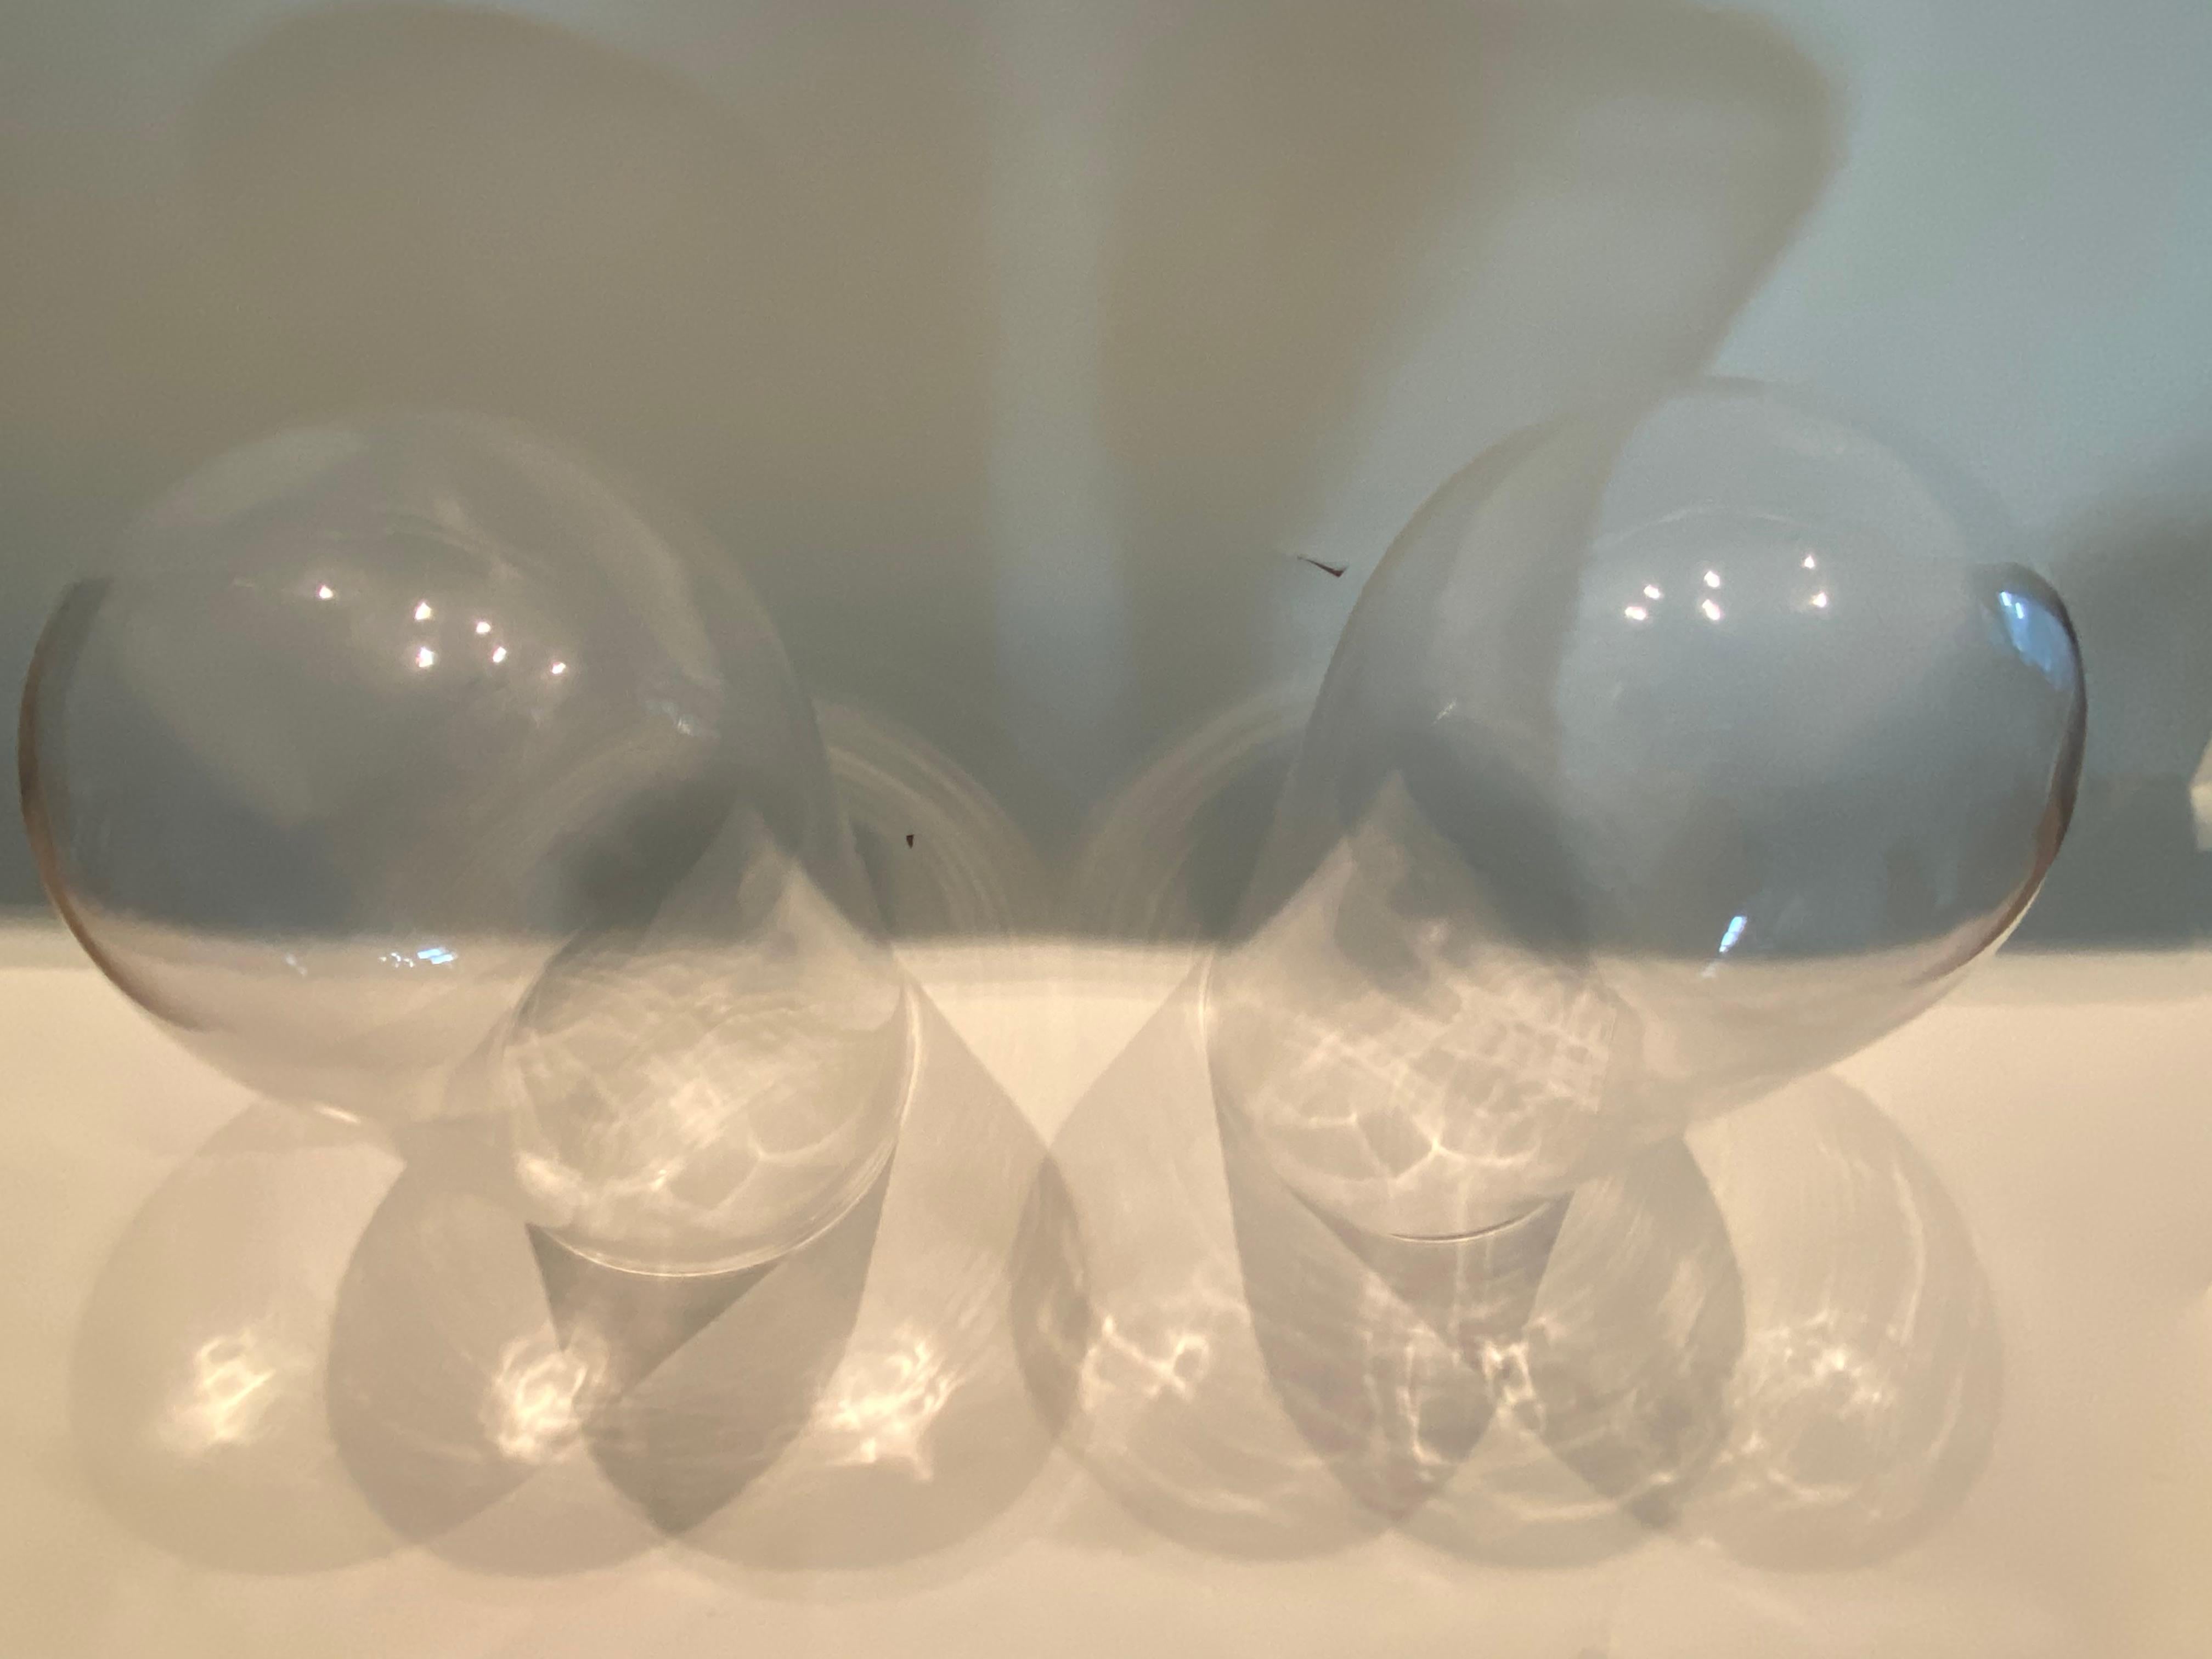 This pair of tall glass display domes or cloches are perfect for showcasing fragile artworks, watches or botanicals.  The photographs appear dark, but these domes are clear glass.